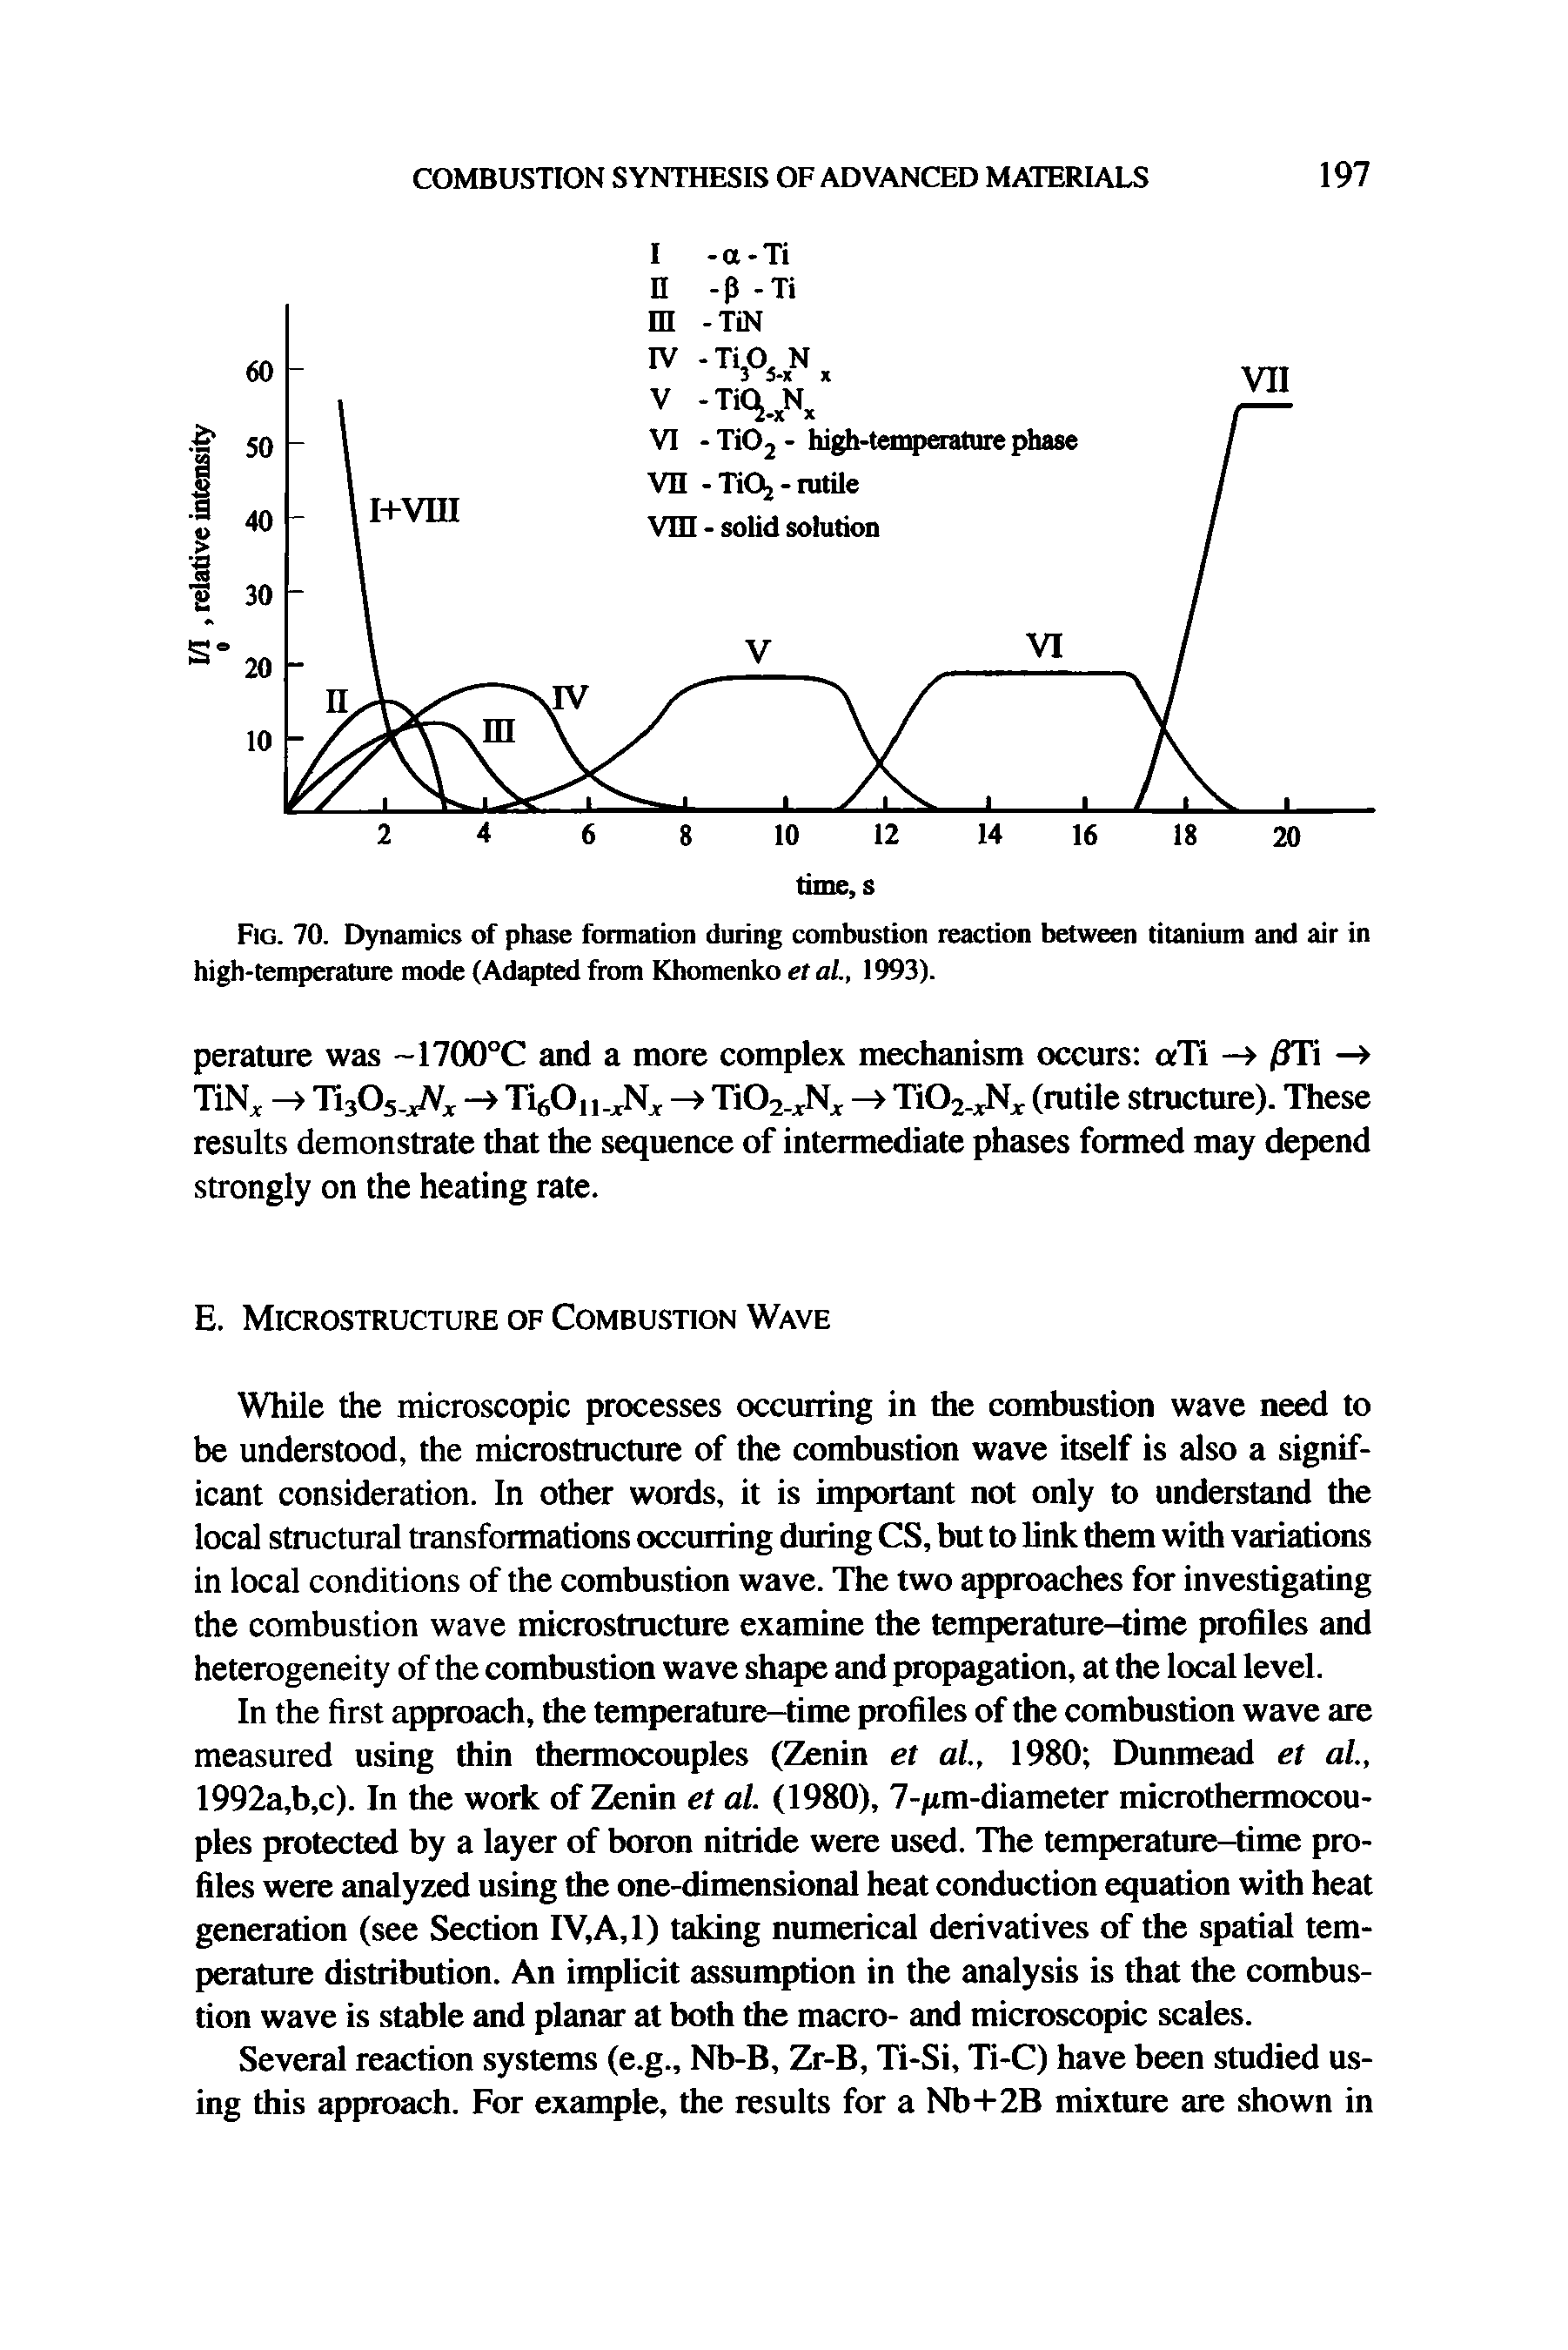 Fig. 70. Dynamics of phase fonnation during combustion reaction between titanium and air in high-temperature mode (Adapted from Khomenko et al., 1993).